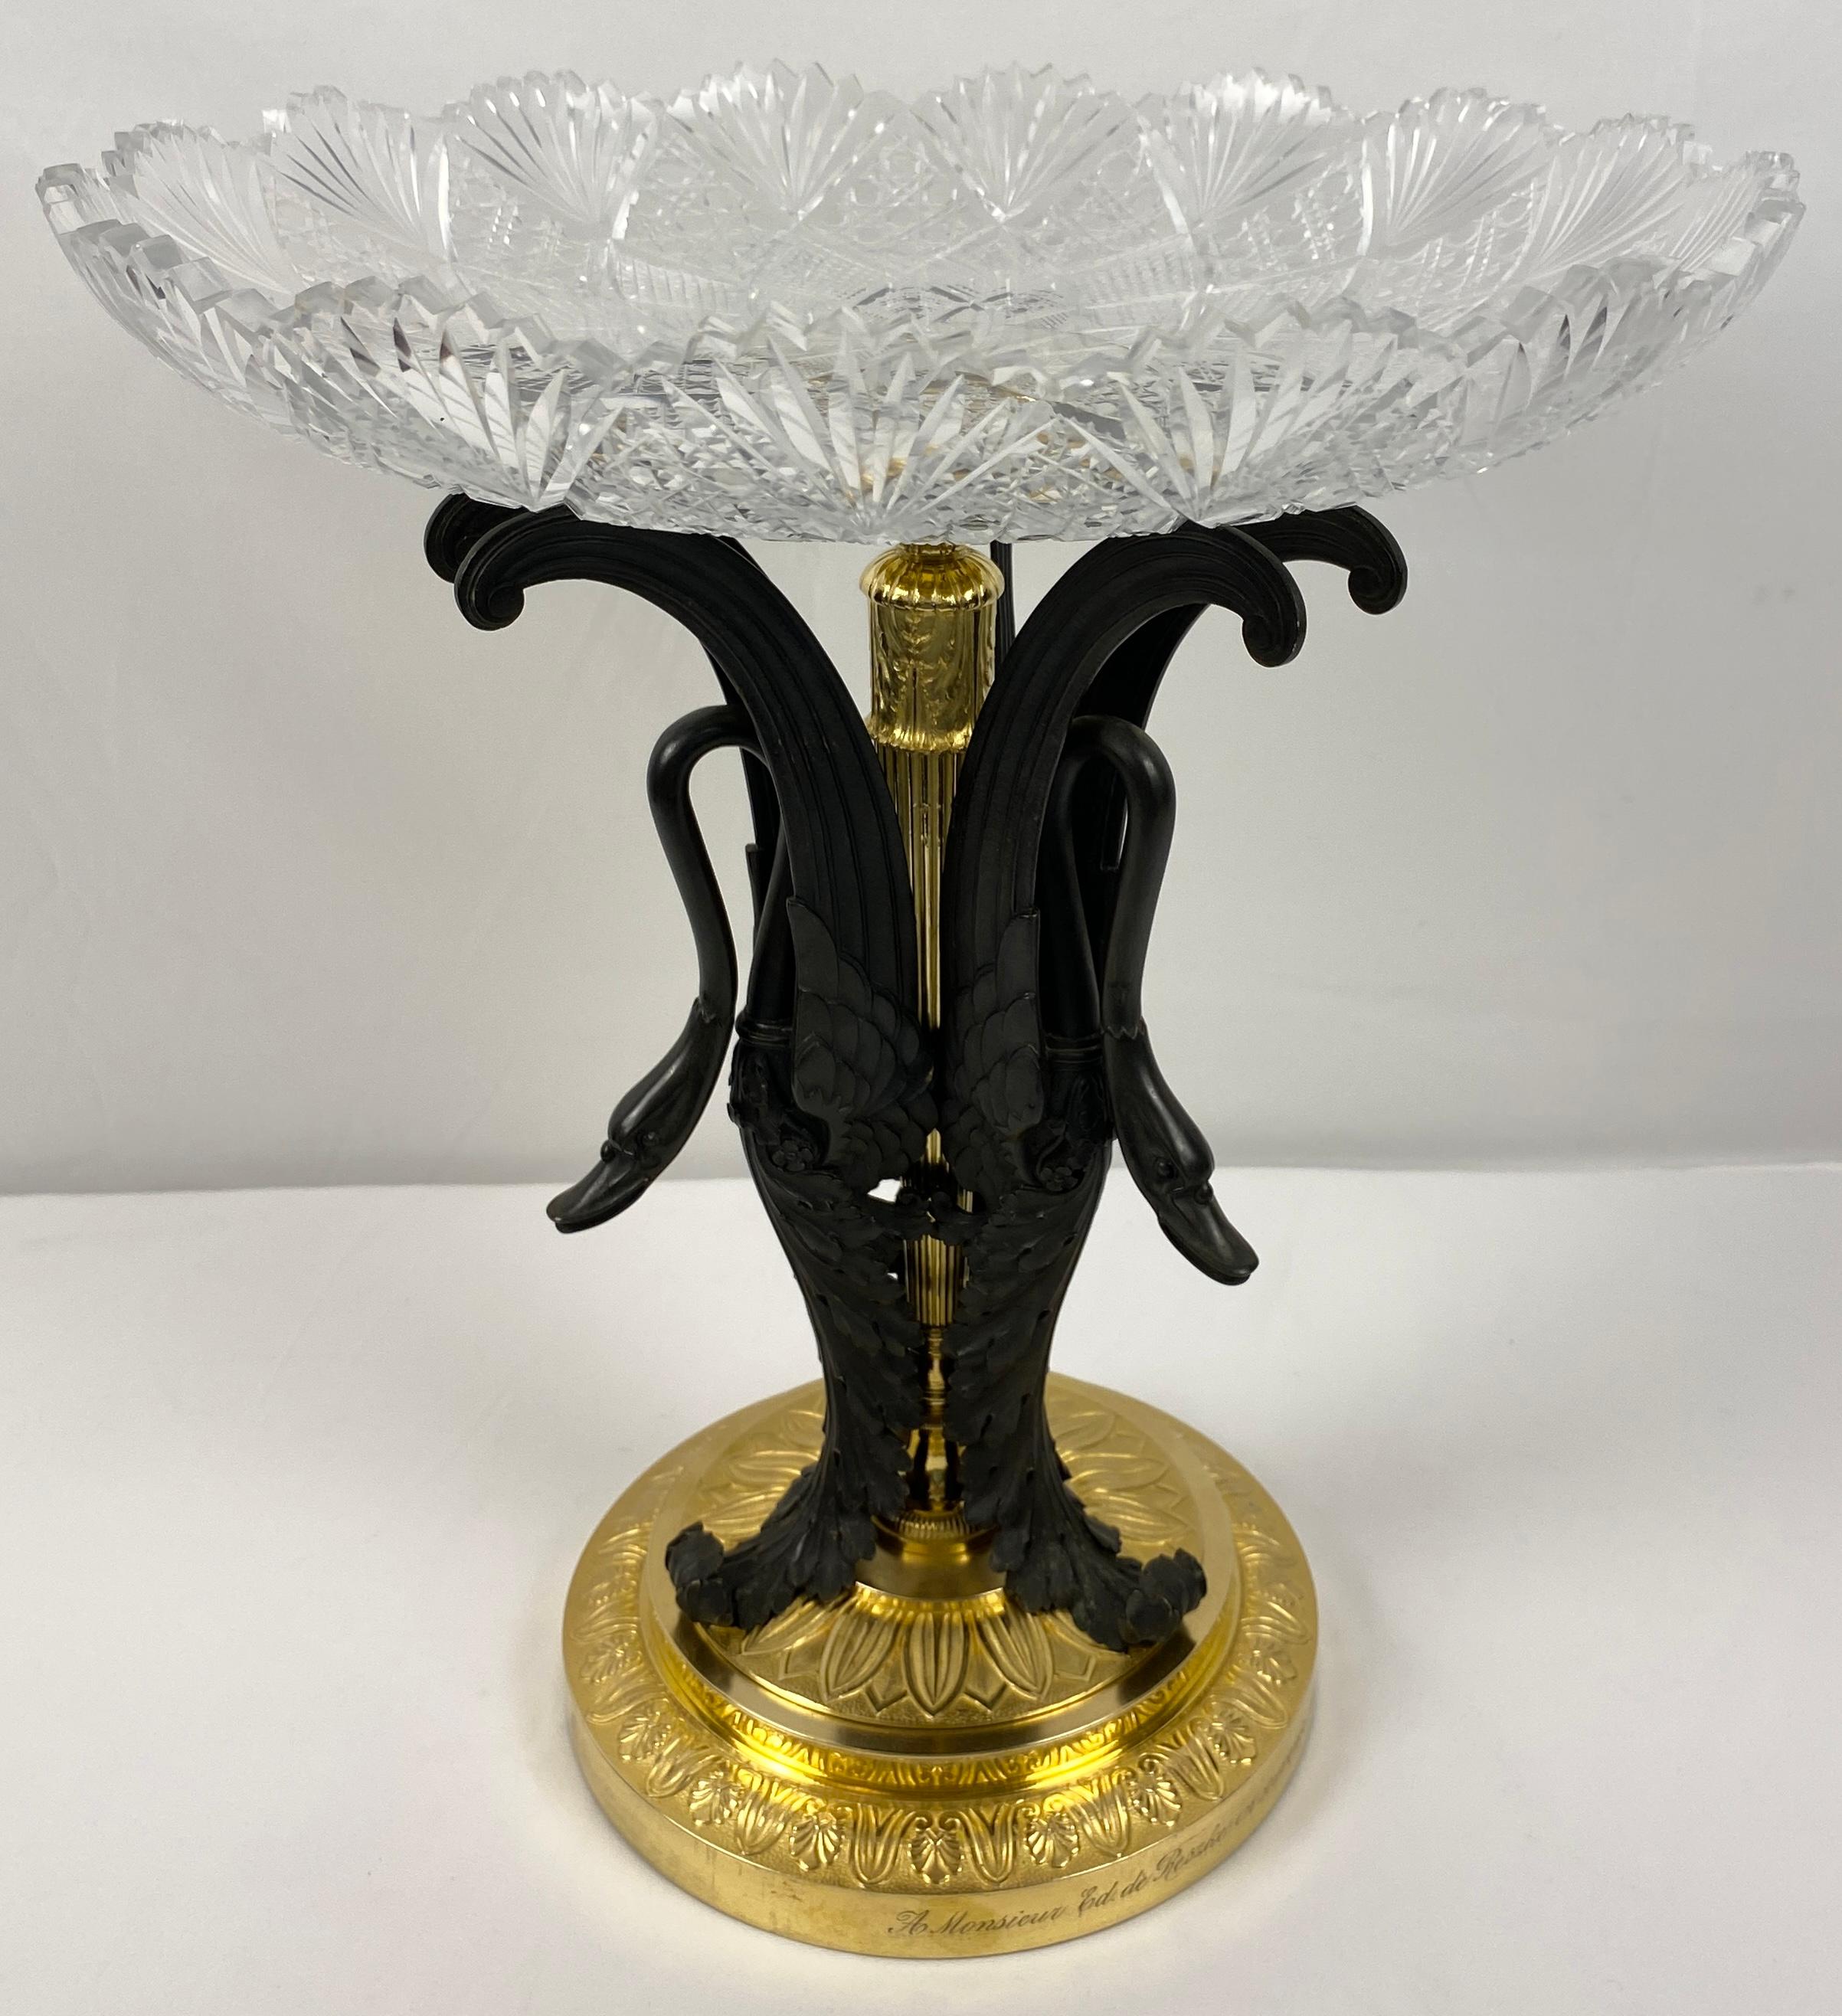 Magnificent Late 19th - Early 20th Century Gilt Bronze Mounted Centerpiece with Crystal attributed to Baccarat. 

Imagine this breathtaking centerpiece on your center table, countertop, bedside table or elsewhere – a deeply cut crystal tazza,